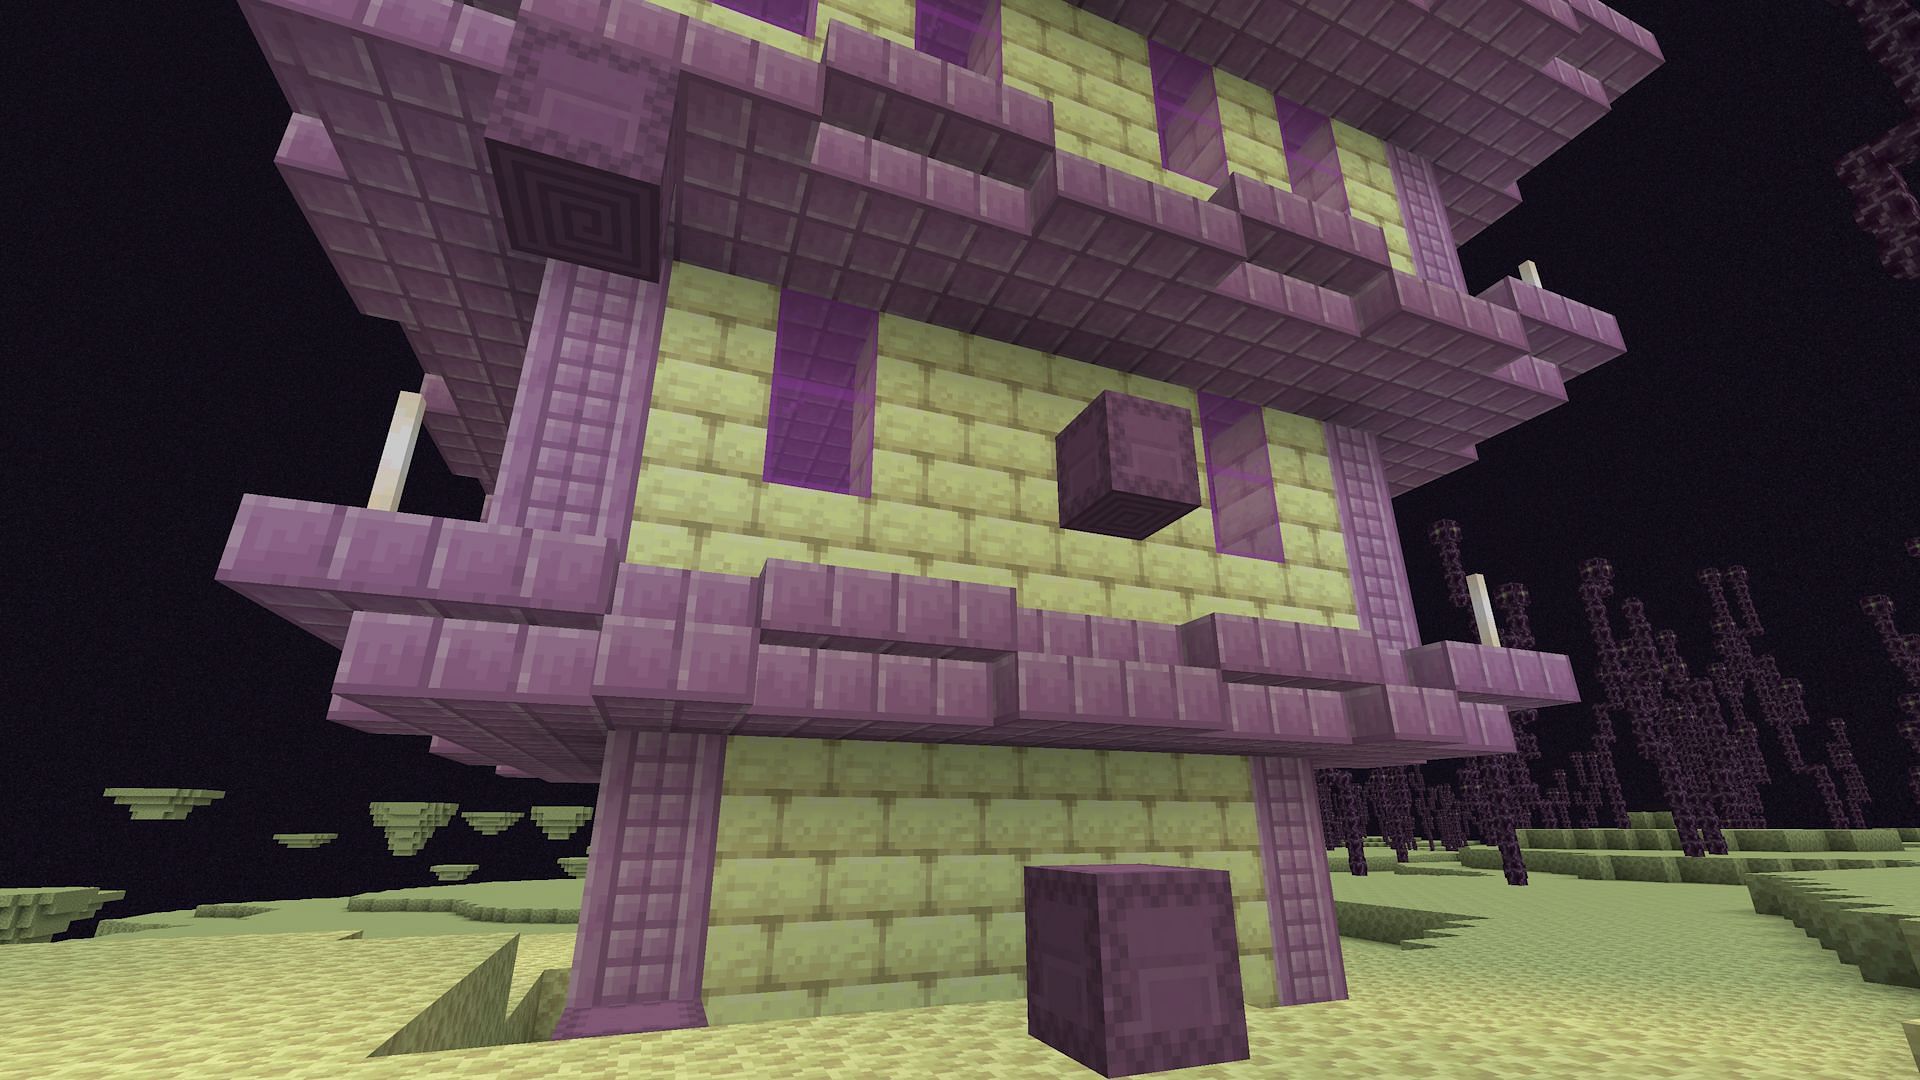 Breach would be a better solo mace enchantment if it was useful against more than just shulkers (Image via Mojang)